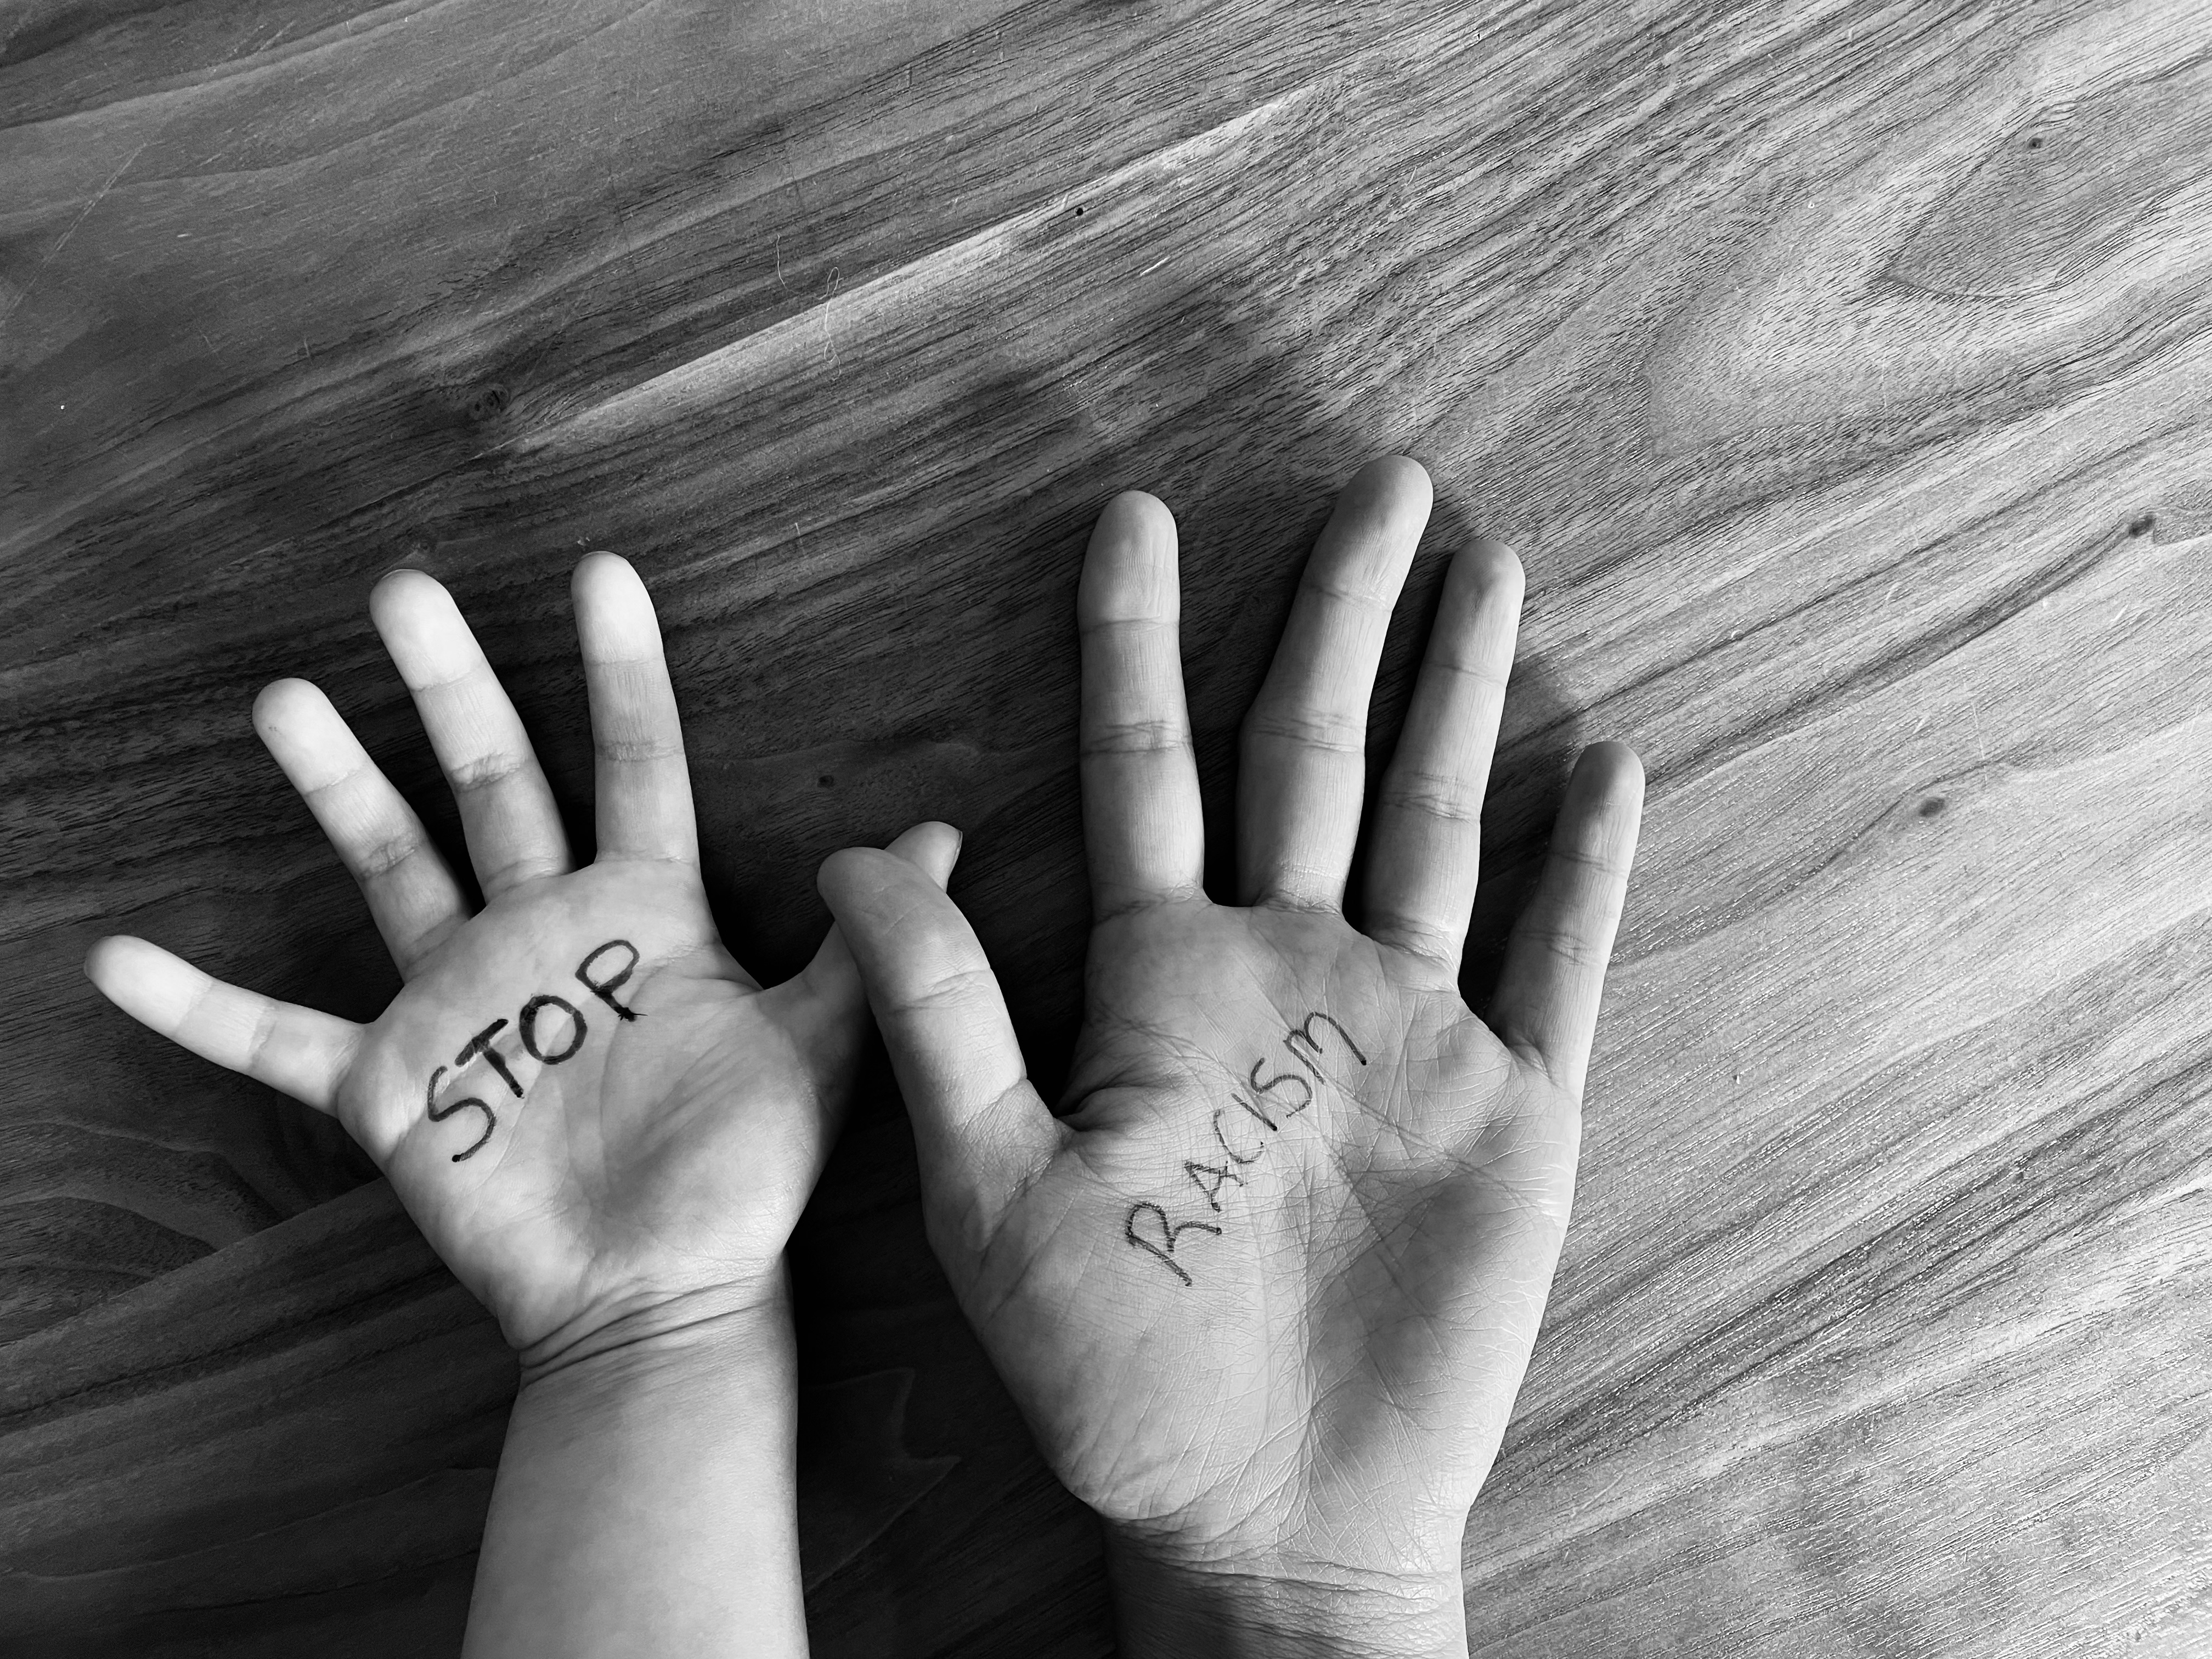 child hand and adult hand with "stop racism" written on the palms